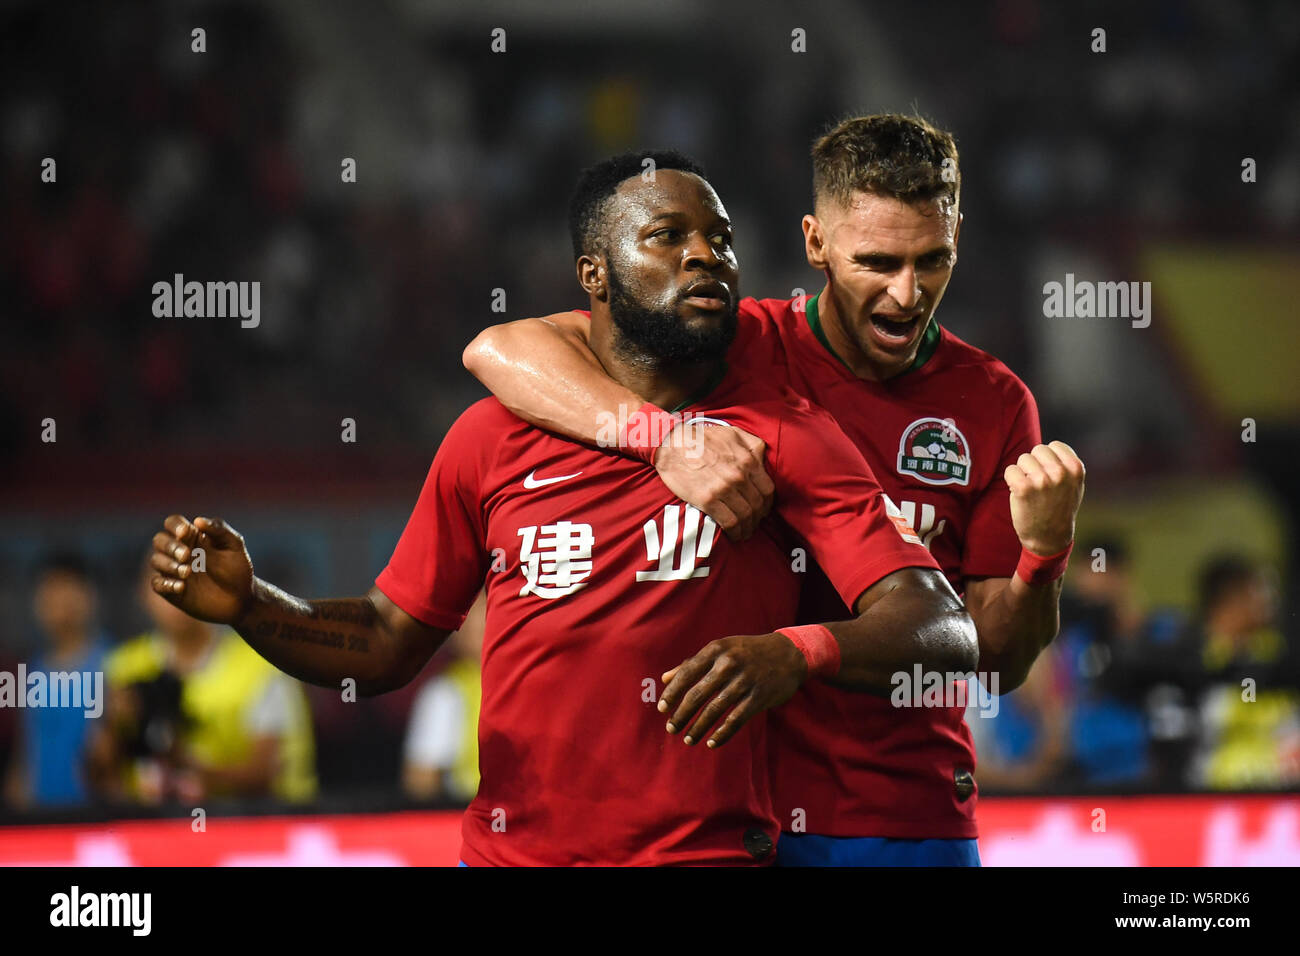 Cameroonian football player Franck Ohandza, left, of Henan Jianye celebrates with Brazilian football player Olivio da Rosa, also known as Ivo, after s Stock Photo